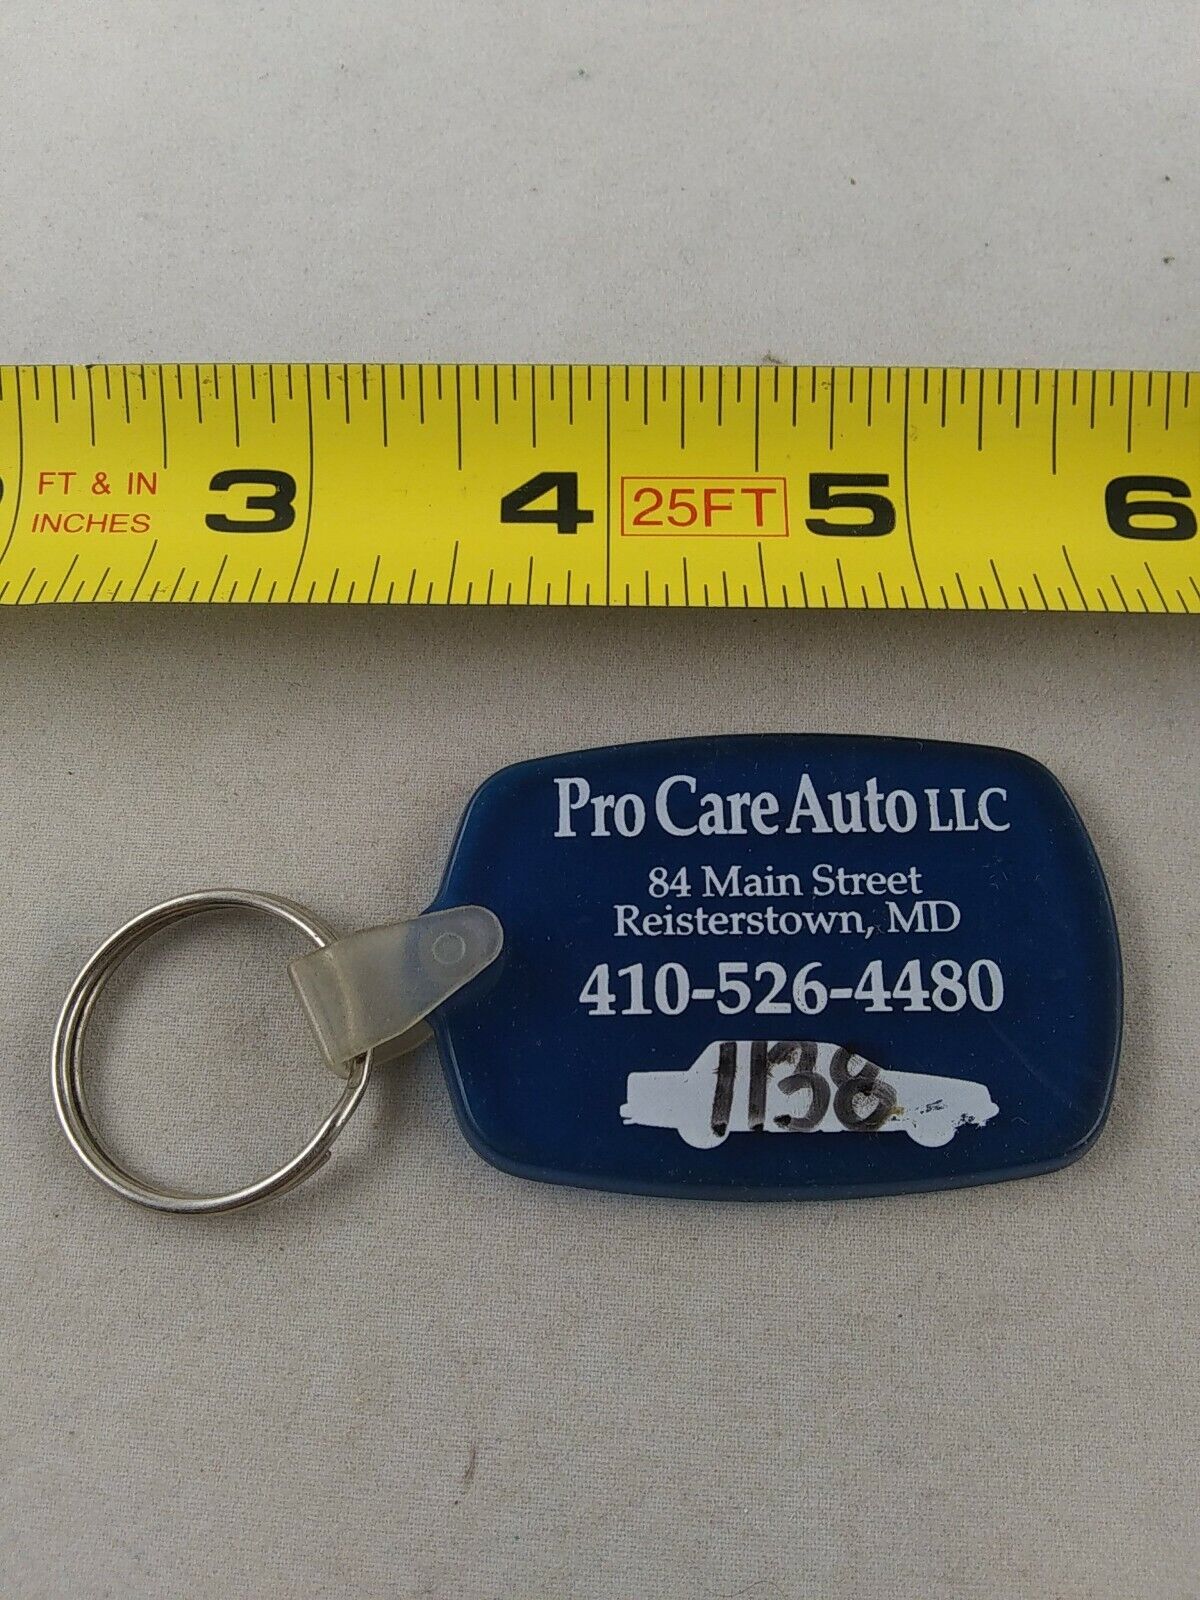 Vintage Pro Care Auto Reisterstown Key Chain Keychain Fob Key Ring Hangtag *QQ30